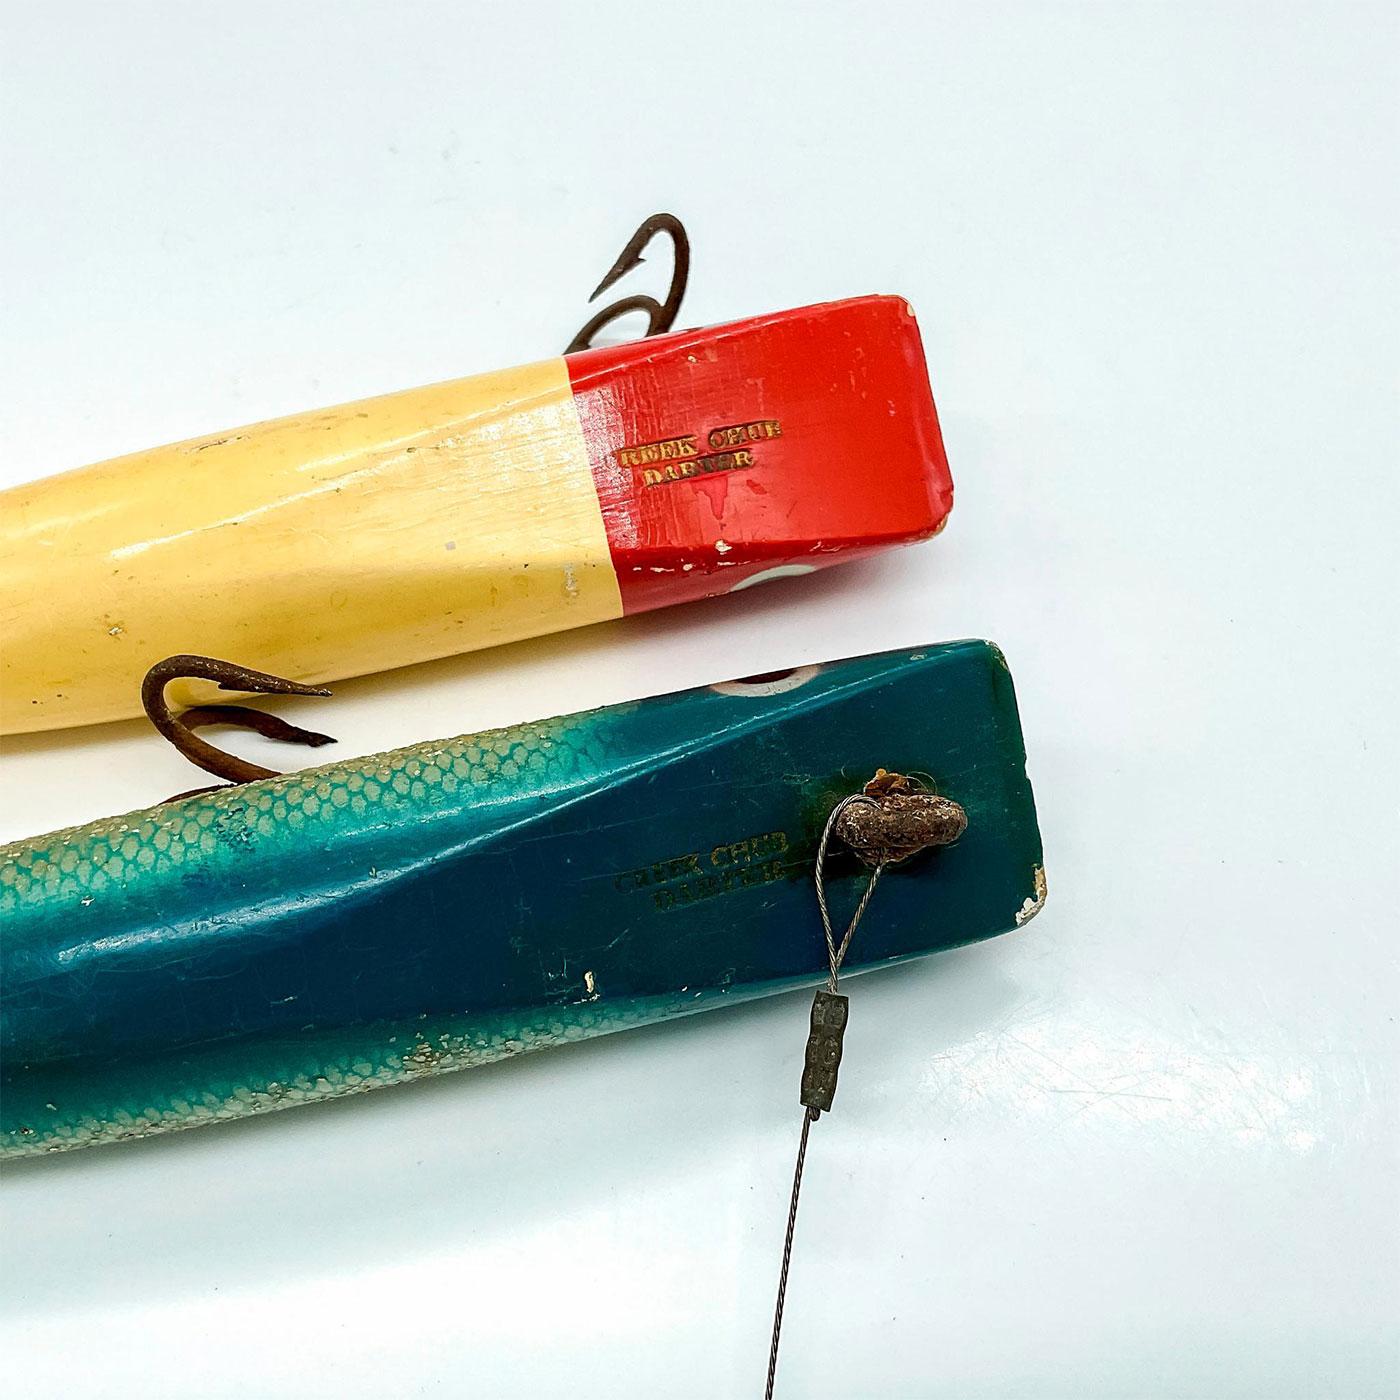 Pair of Creek Chub Darter Lures, Red/White and Blue Flash